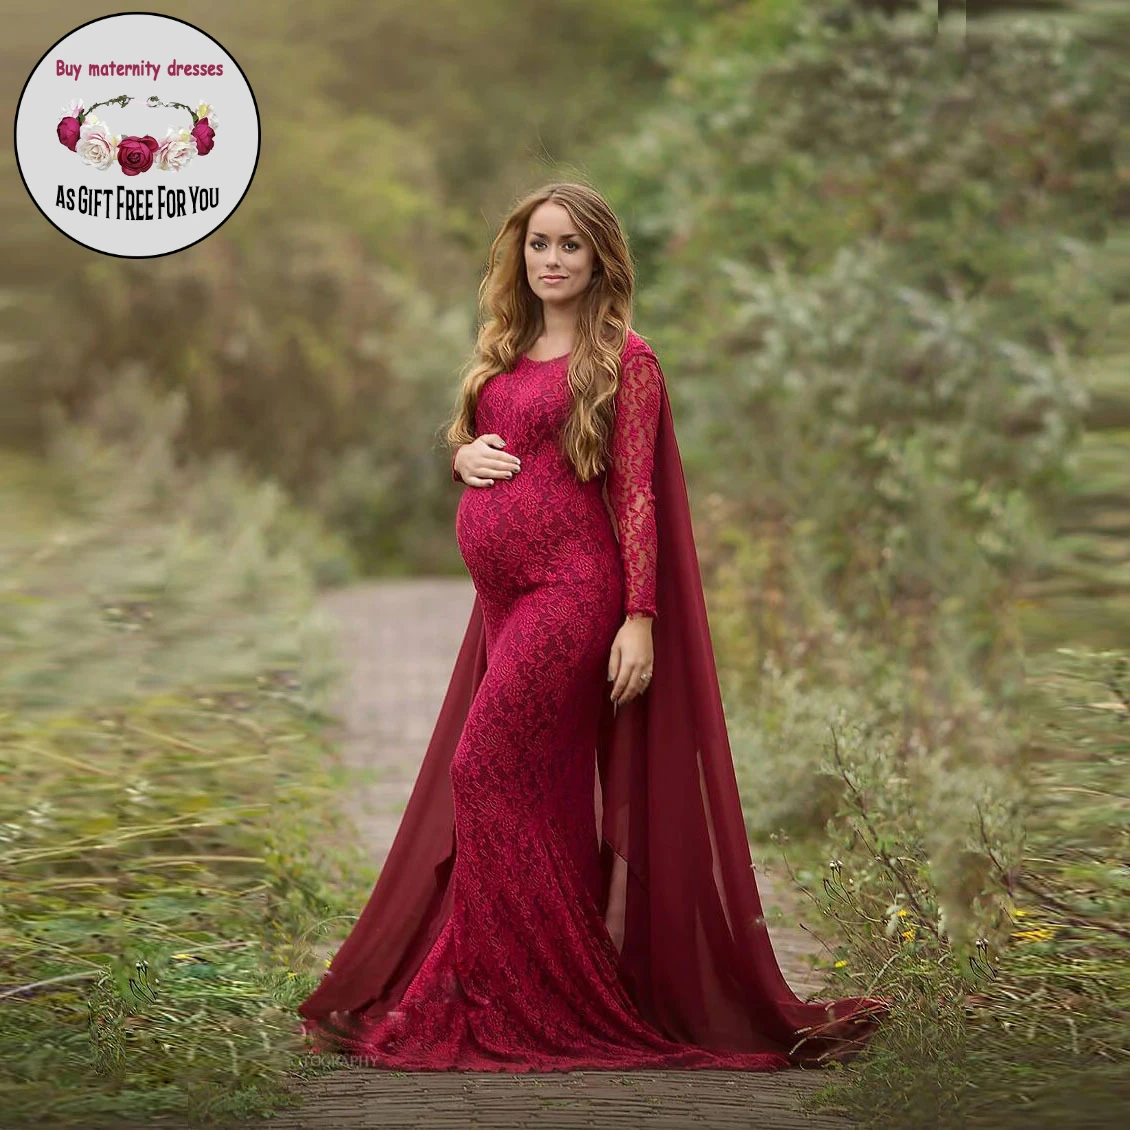 Women Long Tail  Maternity Dresses Sexy Lace Bateau  Long Sleeve   Pregnancy   Dress Maxi Gown maternity dress for photography